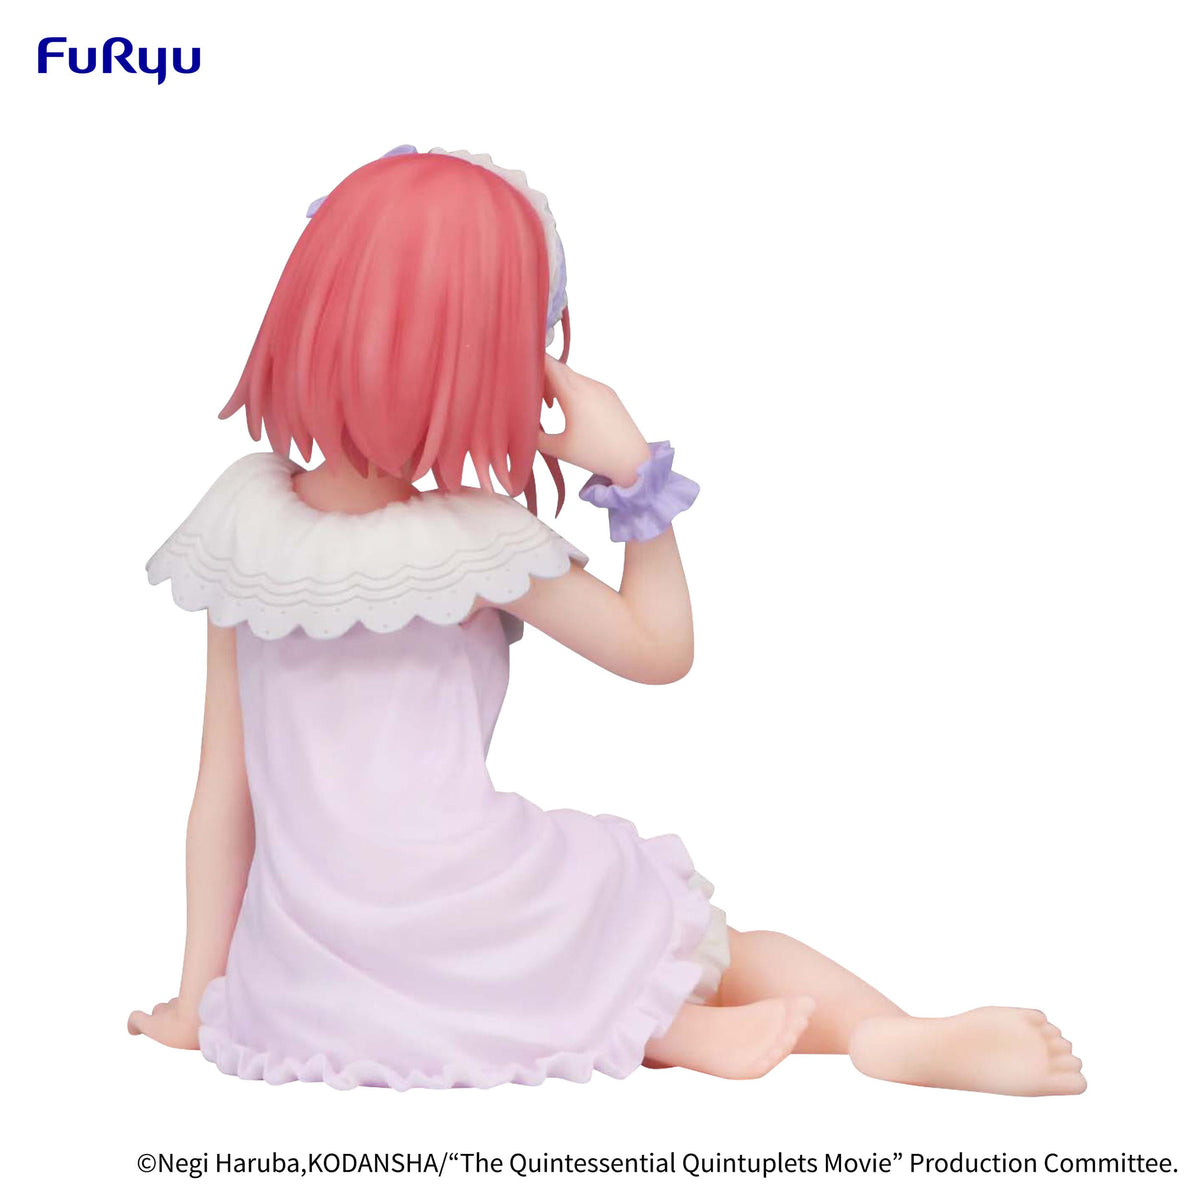 The Quintessential Quintuplets - Nino Nakano - Loungewear Noodle Stopper Figur (Furyu)